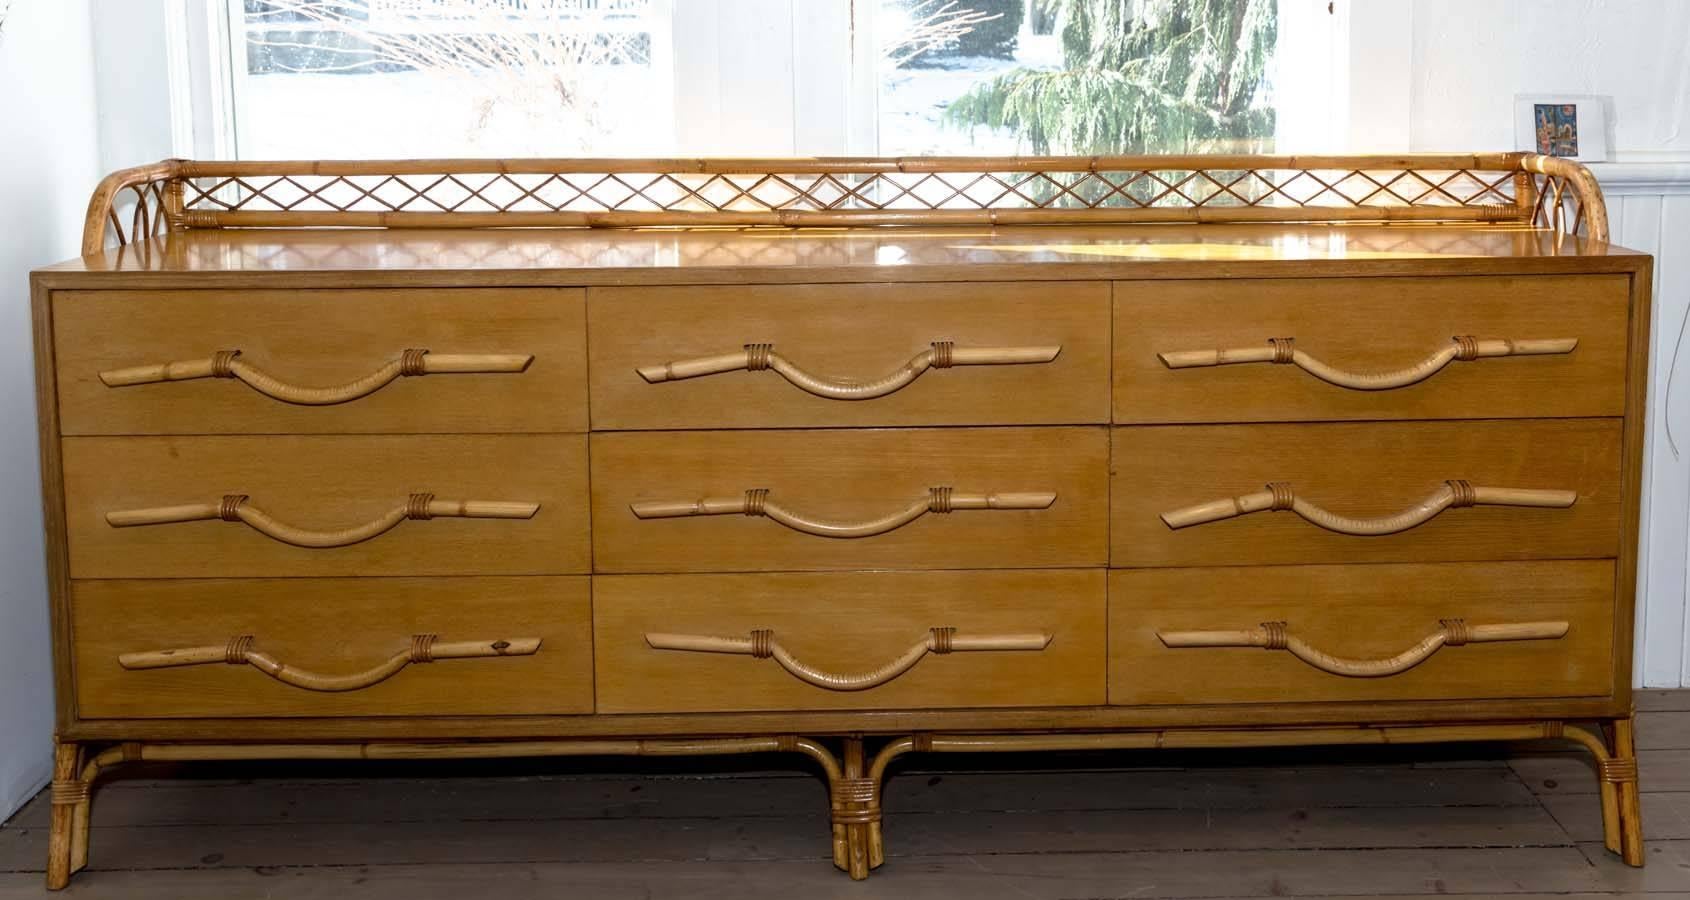 Nine-drawer bamboo and wood credenza with unique detail.